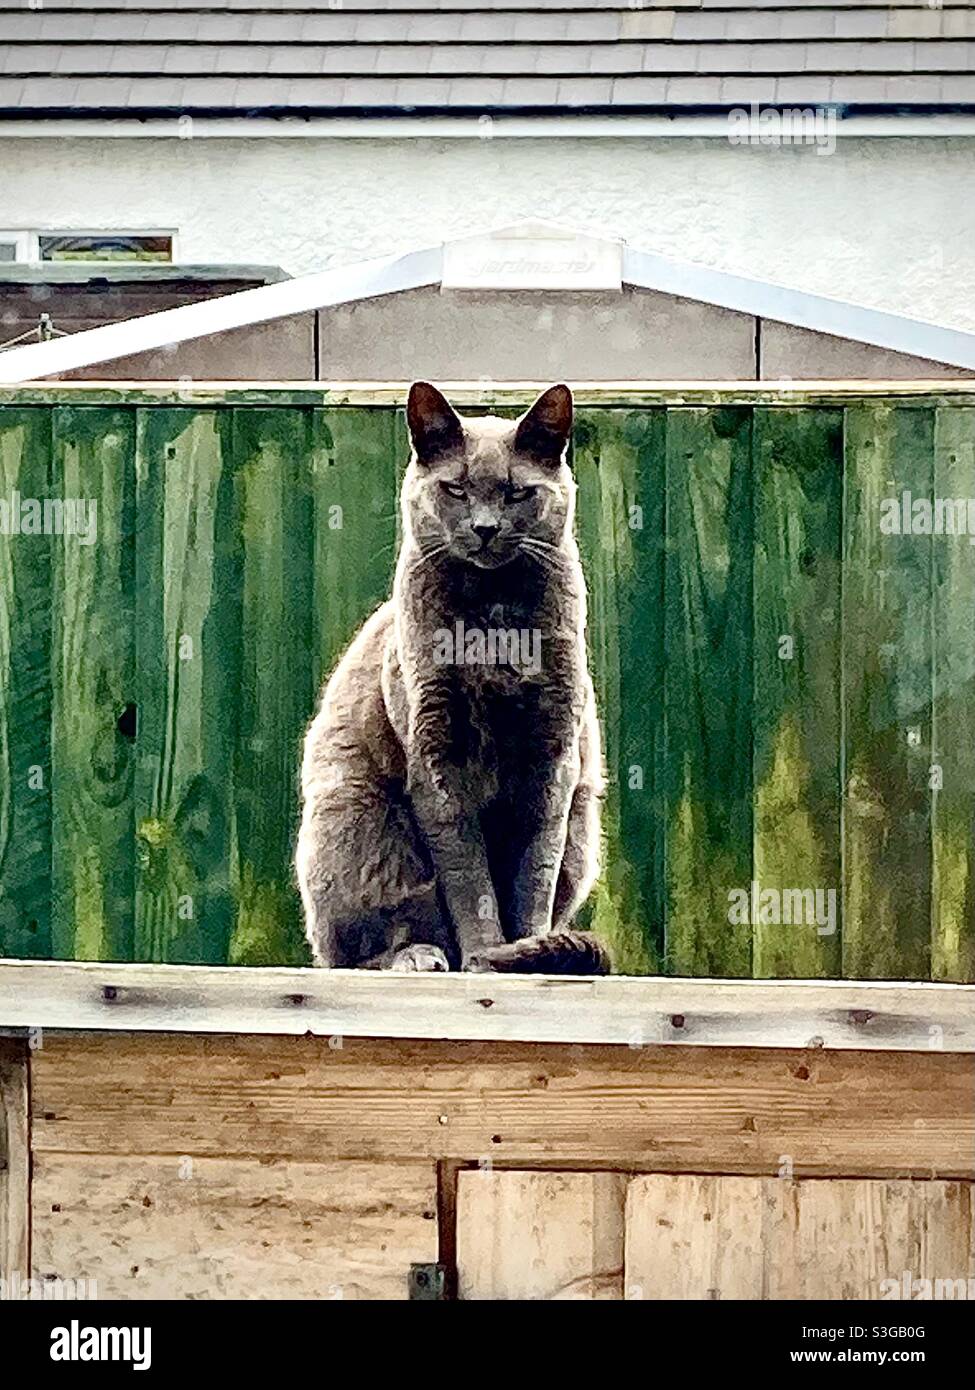 Grey cat sitting upright in front of green fence Stock Photo